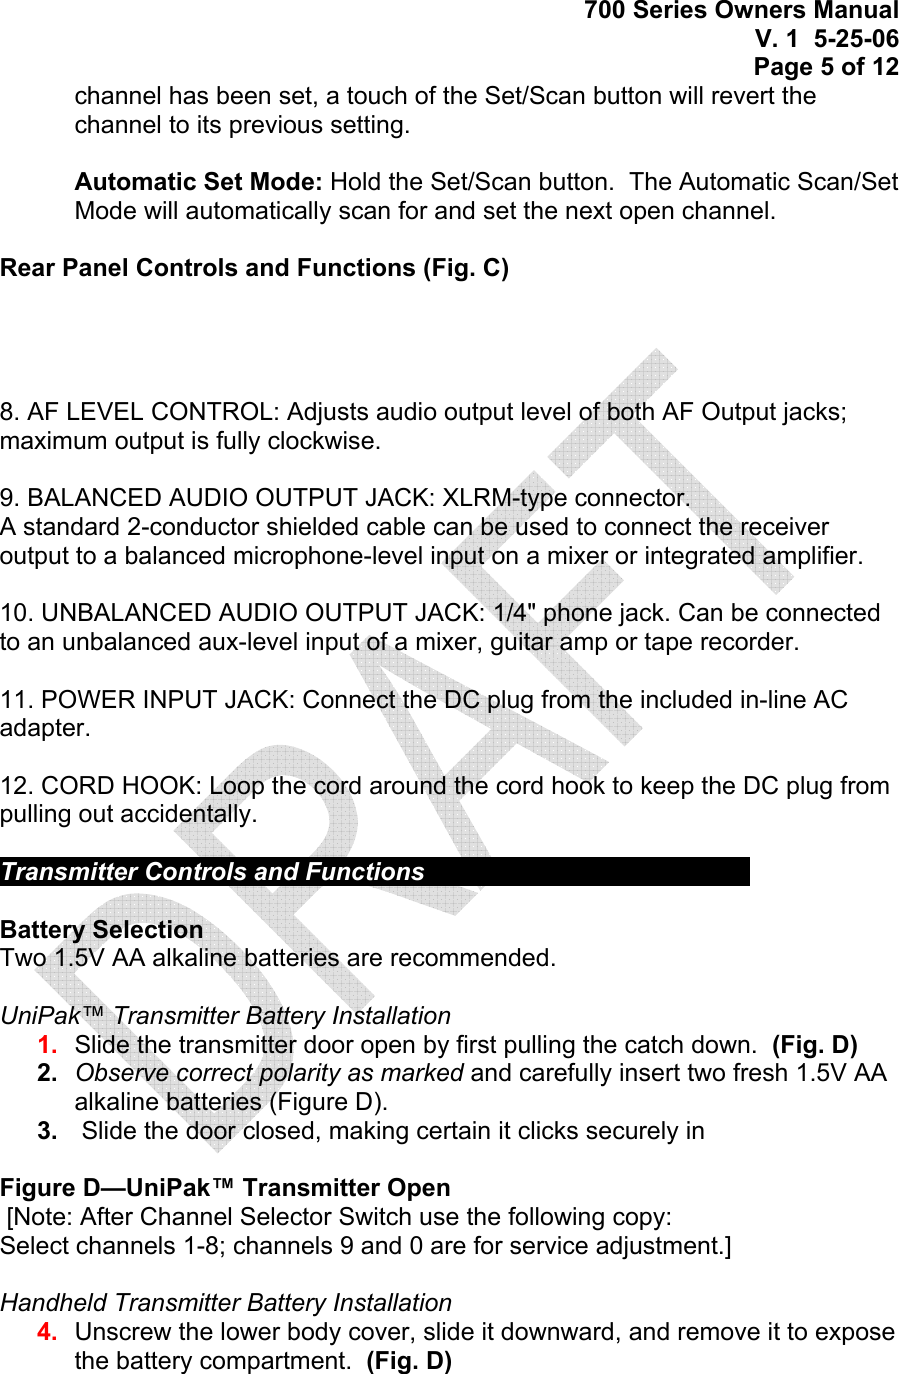 700 Series Owners Manual V. 1  5-25-06 Page 5 of 12 channel has been set, a touch of the Set/Scan button will revert the channel to its previous setting.   Automatic Set Mode: Hold the Set/Scan button.  The Automatic Scan/Set Mode will automatically scan for and set the next open channel.  Rear Panel Controls and Functions (Fig. C)       8. AF LEVEL CONTROL: Adjusts audio output level of both AF Output jacks; maximum output is fully clockwise.  9. BALANCED AUDIO OUTPUT JACK: XLRM-type connector. A standard 2-conductor shielded cable can be used to connect the receiver output to a balanced microphone-level input on a mixer or integrated amplifier.  10. UNBALANCED AUDIO OUTPUT JACK: 1/4&quot; phone jack. Can be connected to an unbalanced aux-level input of a mixer, guitar amp or tape recorder.  11. POWER INPUT JACK: Connect the DC plug from the included in-line AC adapter.  12. CORD HOOK: Loop the cord around the cord hook to keep the DC plug from pulling out accidentally.  Transmitter Controls and Functions          Battery Selection Two 1.5V AA alkaline batteries are recommended.  UniPak™ Transmitter Battery Installation  1.  Slide the transmitter door open by first pulling the catch down.  (Fig. D)  2.  Observe correct polarity as marked and carefully insert two fresh 1.5V AA alkaline batteries (Figure D). 3.   Slide the door closed, making certain it clicks securely in  Figure D—UniPak™ Transmitter Open  [Note: After Channel Selector Switch use the following copy:  Select channels 1-8; channels 9 and 0 are for service adjustment.]  Handheld Transmitter Battery Installation  4.  Unscrew the lower body cover, slide it downward, and remove it to expose the battery compartment.  (Fig. D)   